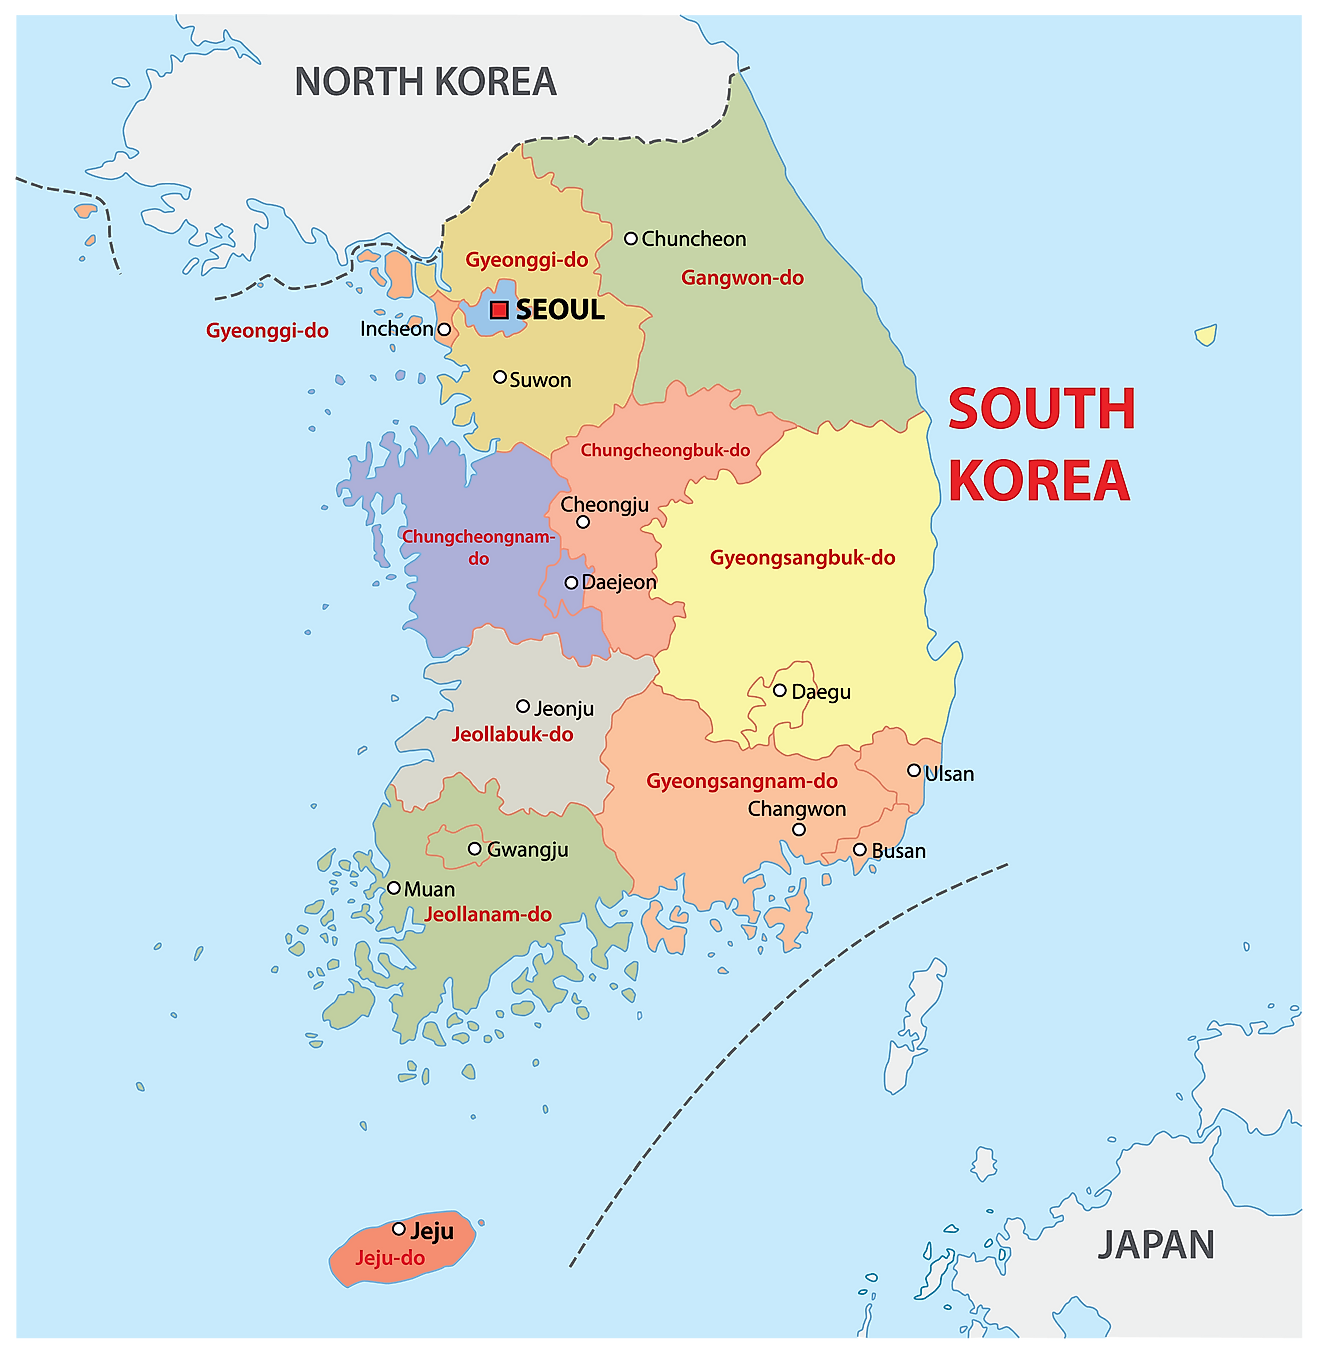 Political Map of South Korea displaying the 9 provinces, 6 metropolitan cities including the national capital of Seoul, etc.